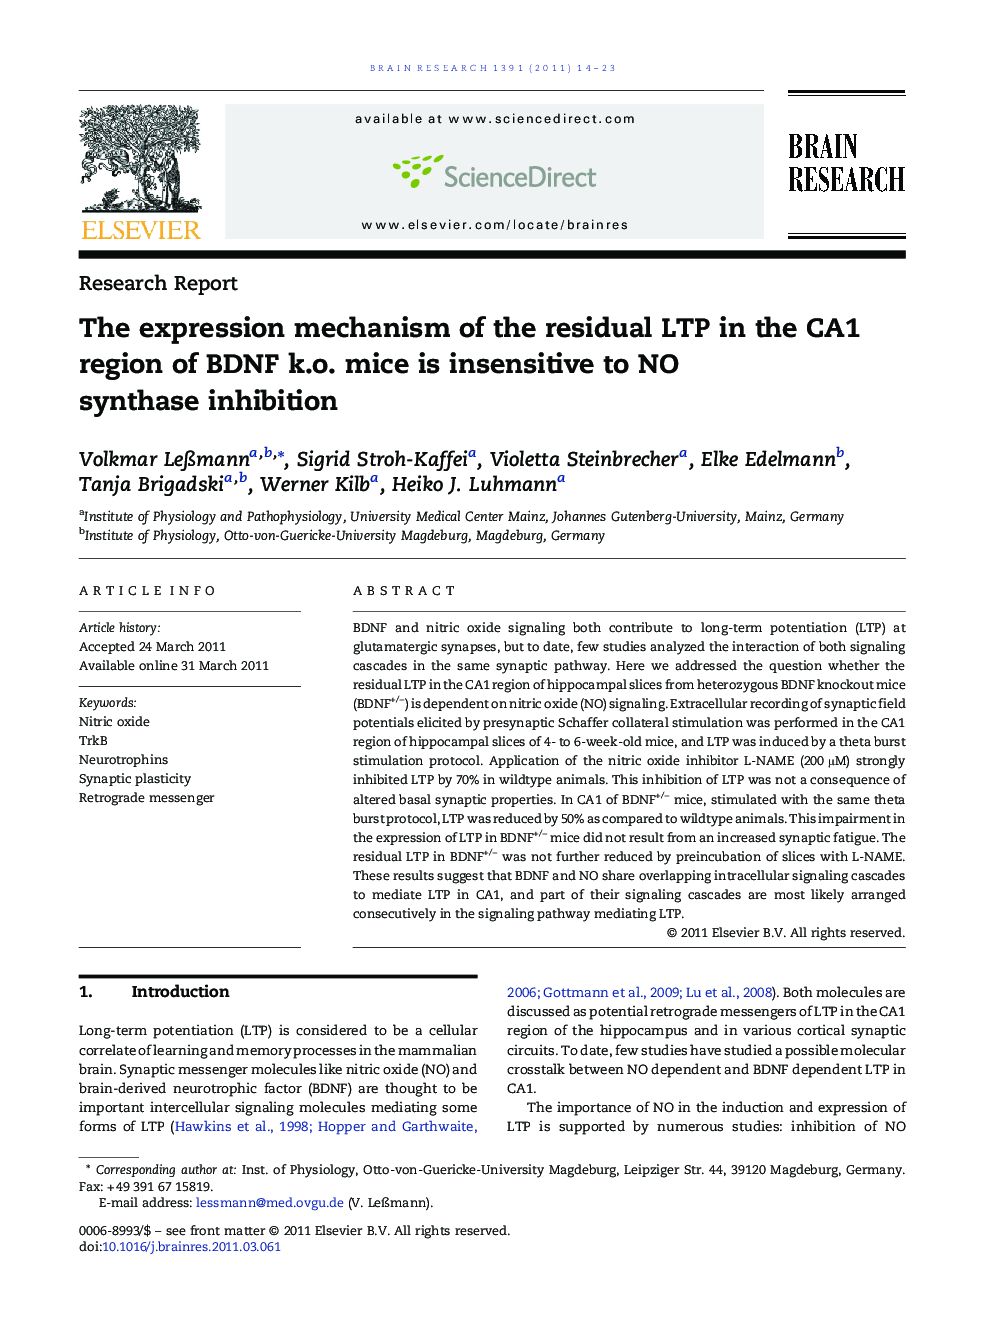 The expression mechanism of the residual LTP in the CA1 region of BDNF k.o. mice is insensitive to NO synthase inhibition